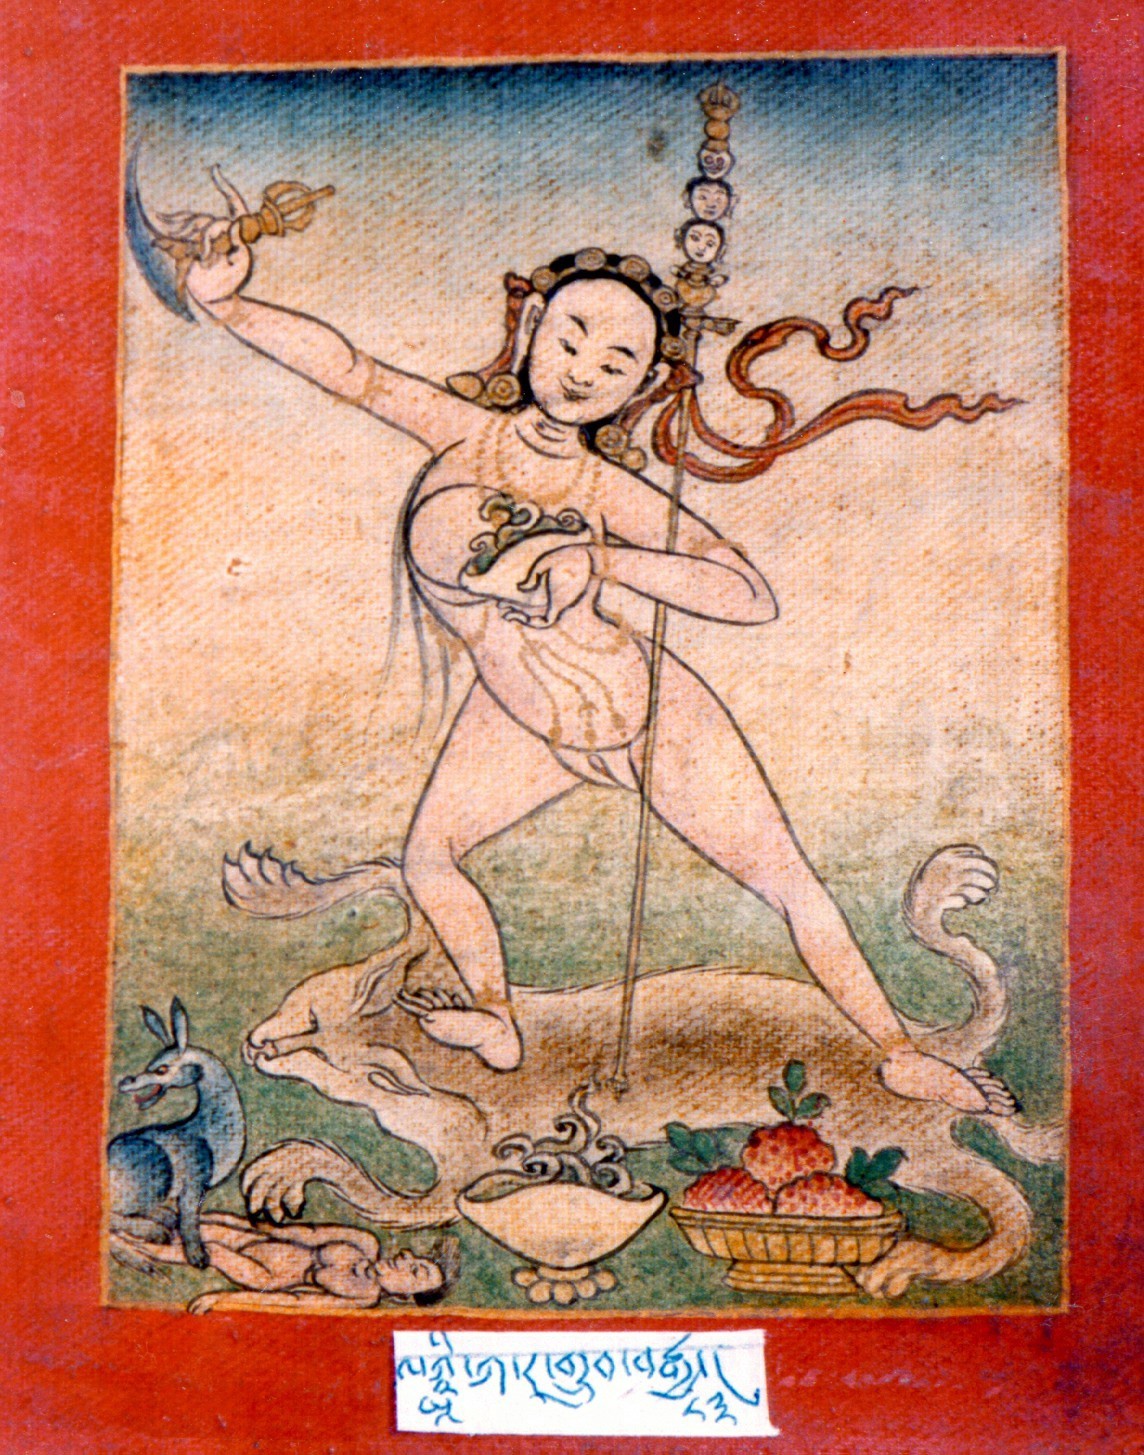 Cham Laksminkara. The main surviving lineage of Chinnamasta in Tibet can be attributed to her. Click to enlarge.